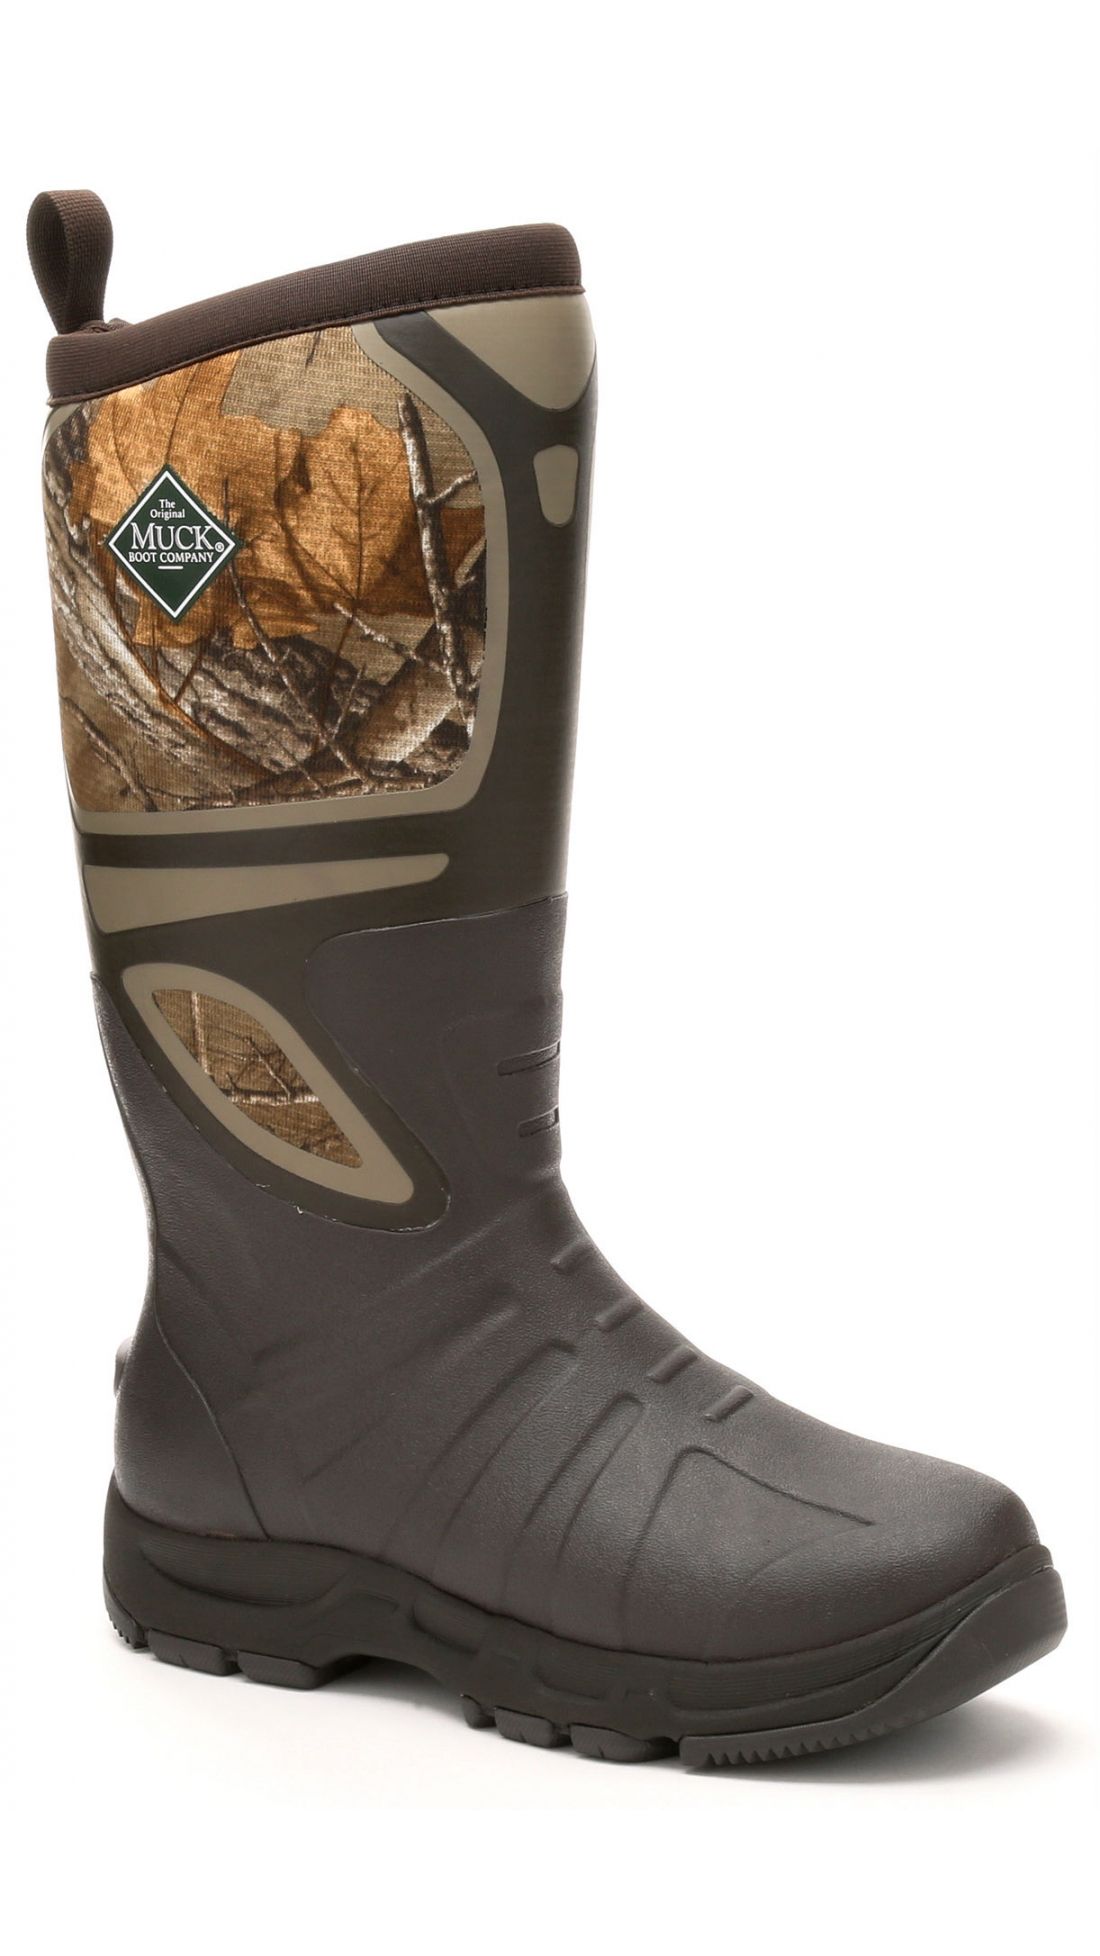 muck hunting boots